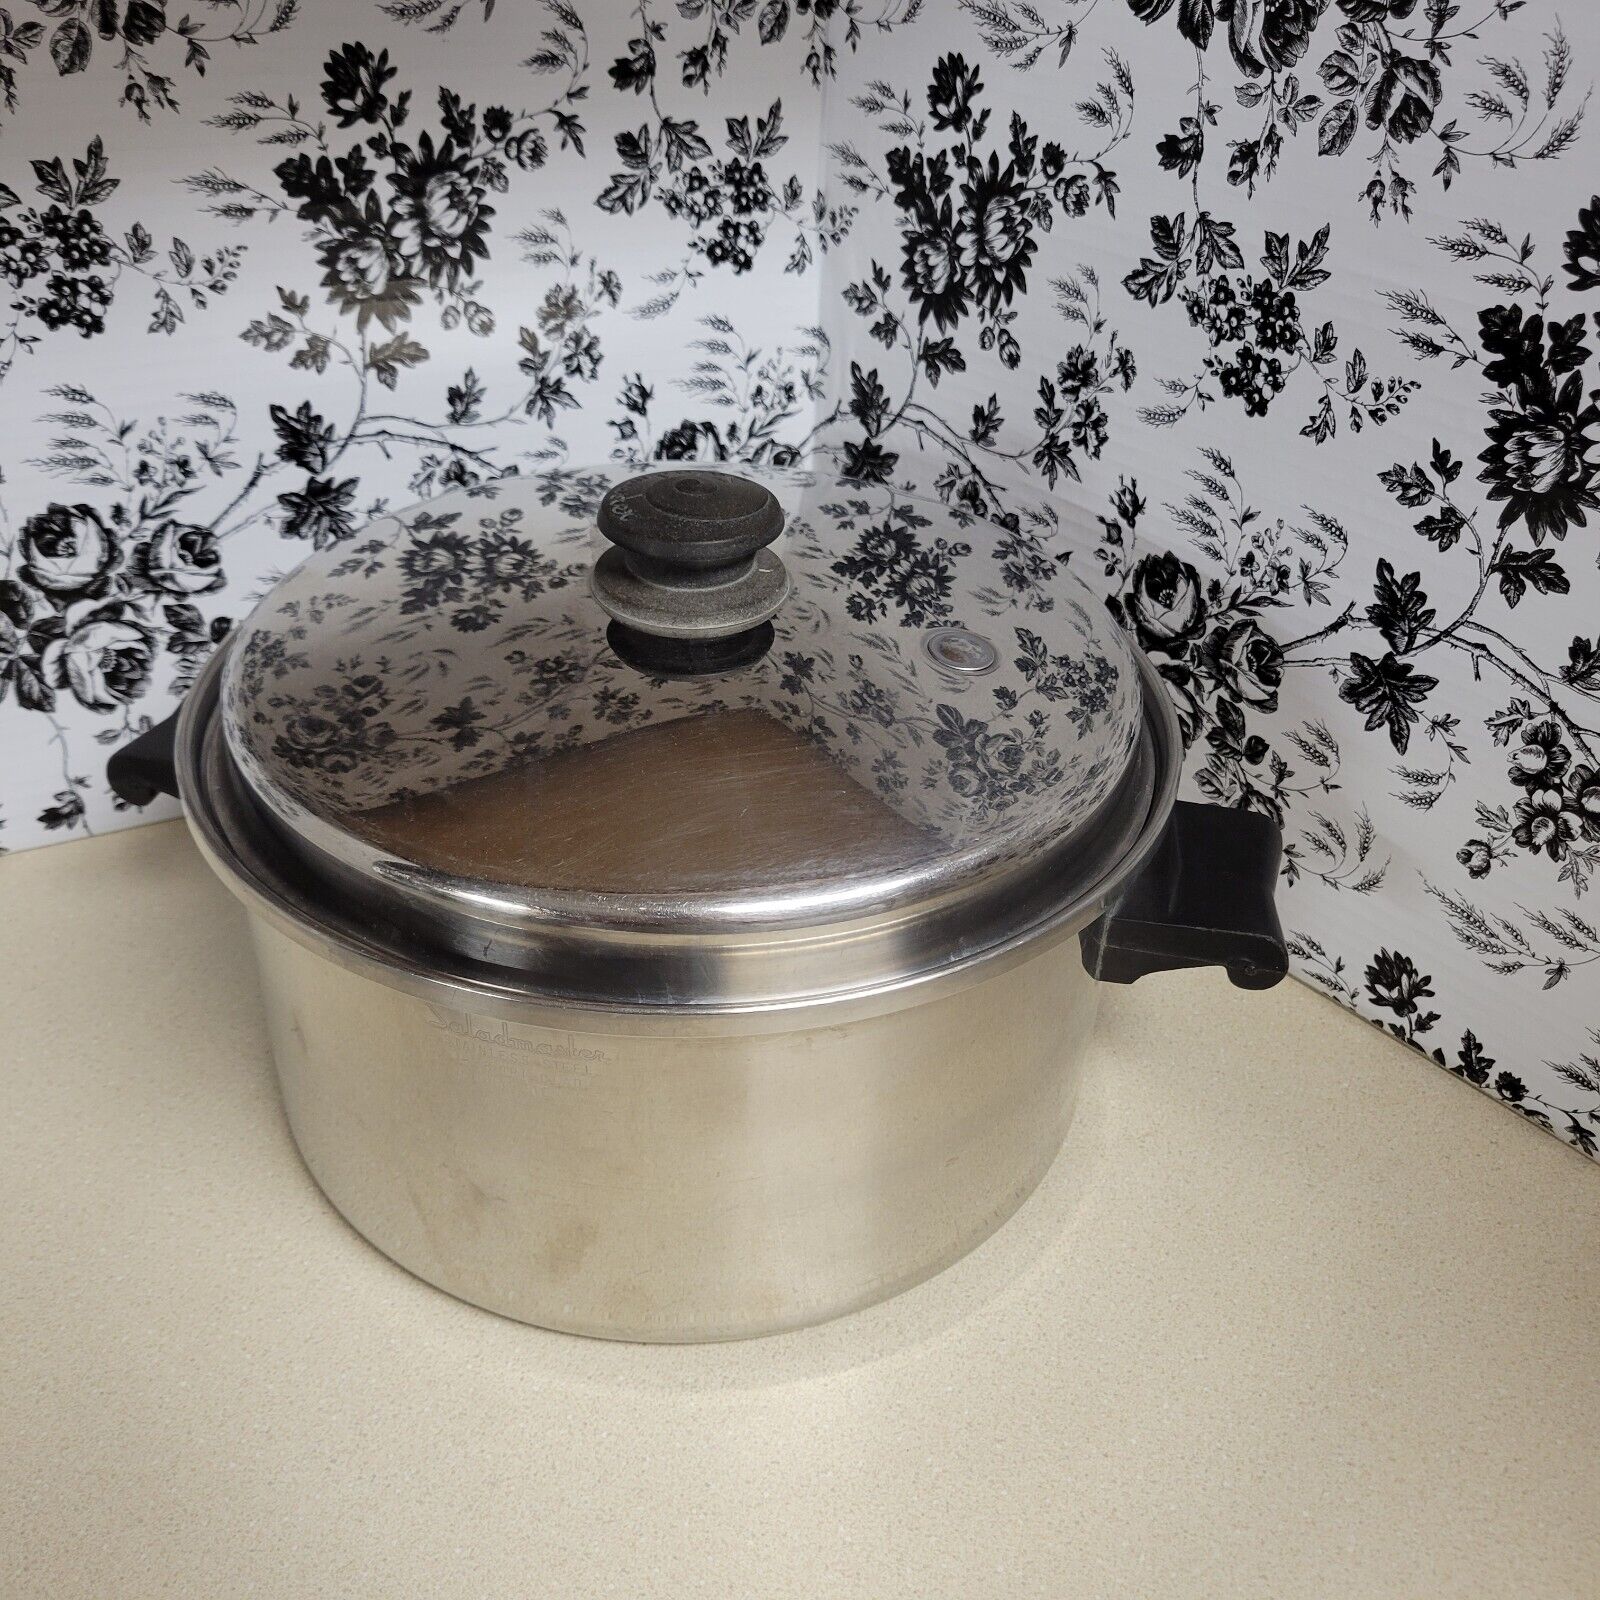 Salad Master 6 Qt Stock Pot Made in USA Stainless Steel Tri Clad 18-8 Vapo Lid